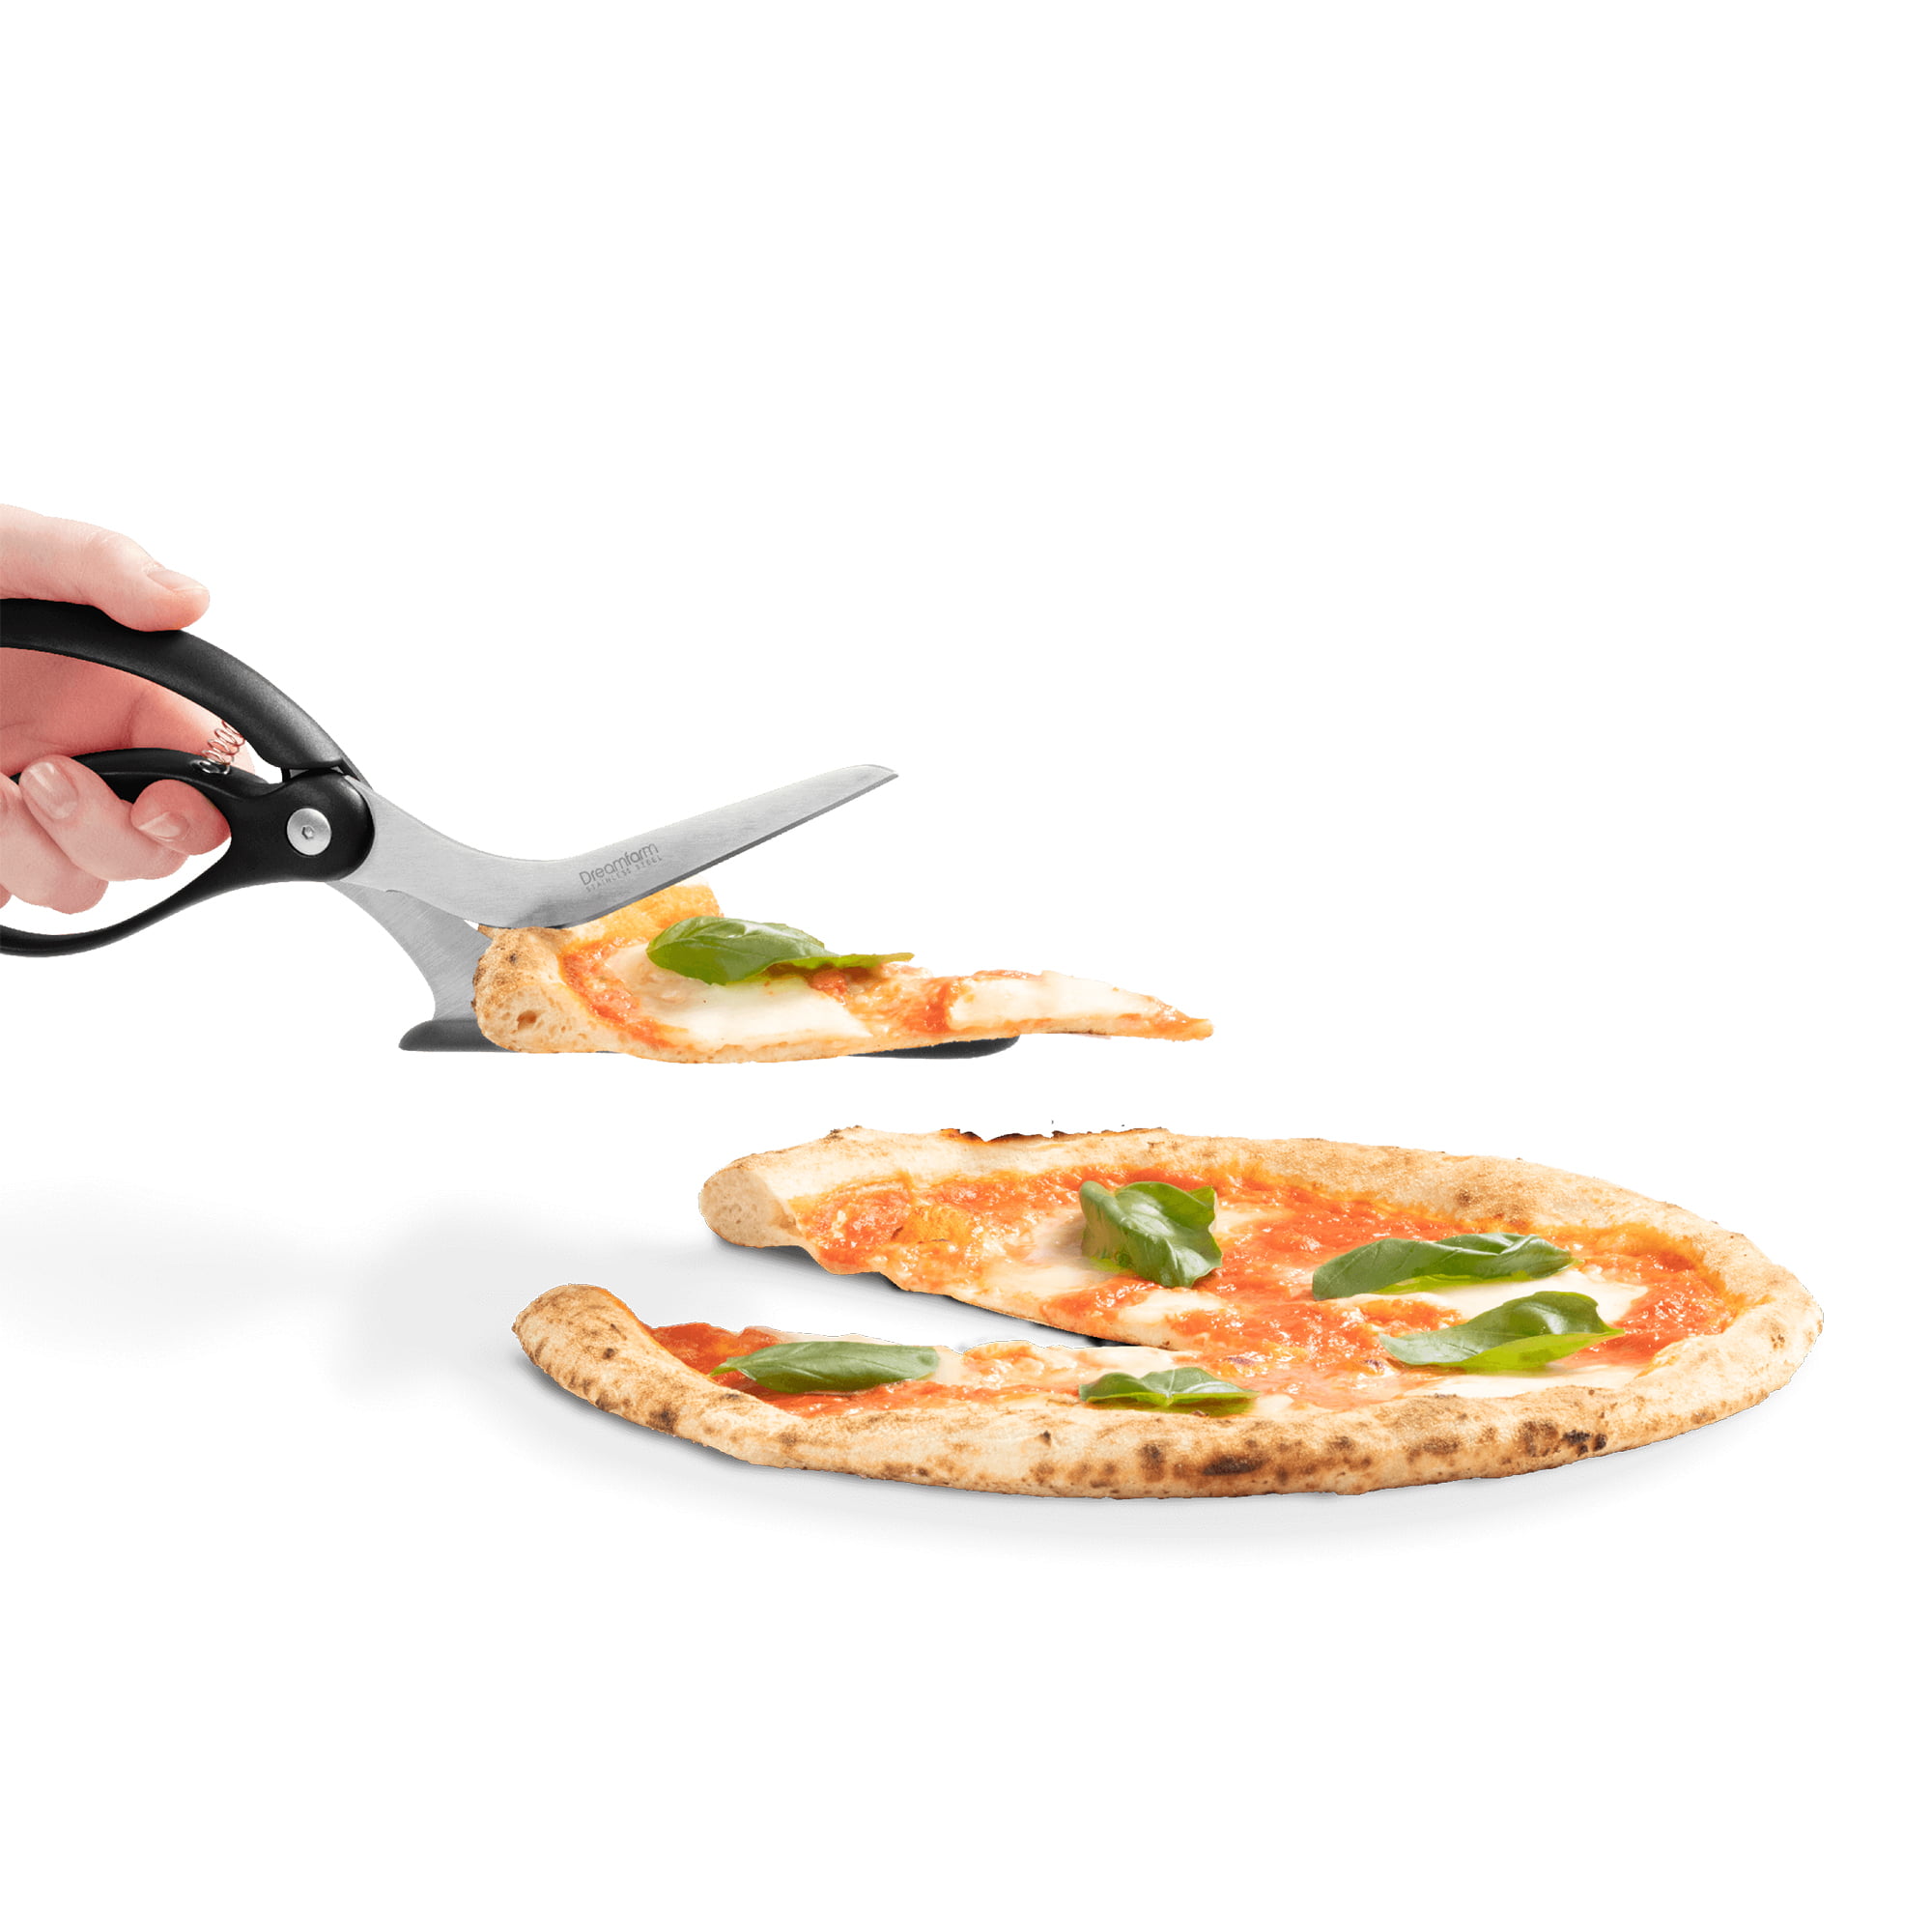  Dreamfarm Scizza, Non-Stick Pizza Scissors with Protective  Server, Stainless Steel All-In-One Pizza Slicer & Pizza Server, Easy-To-Use & Clean Pizza Cutters